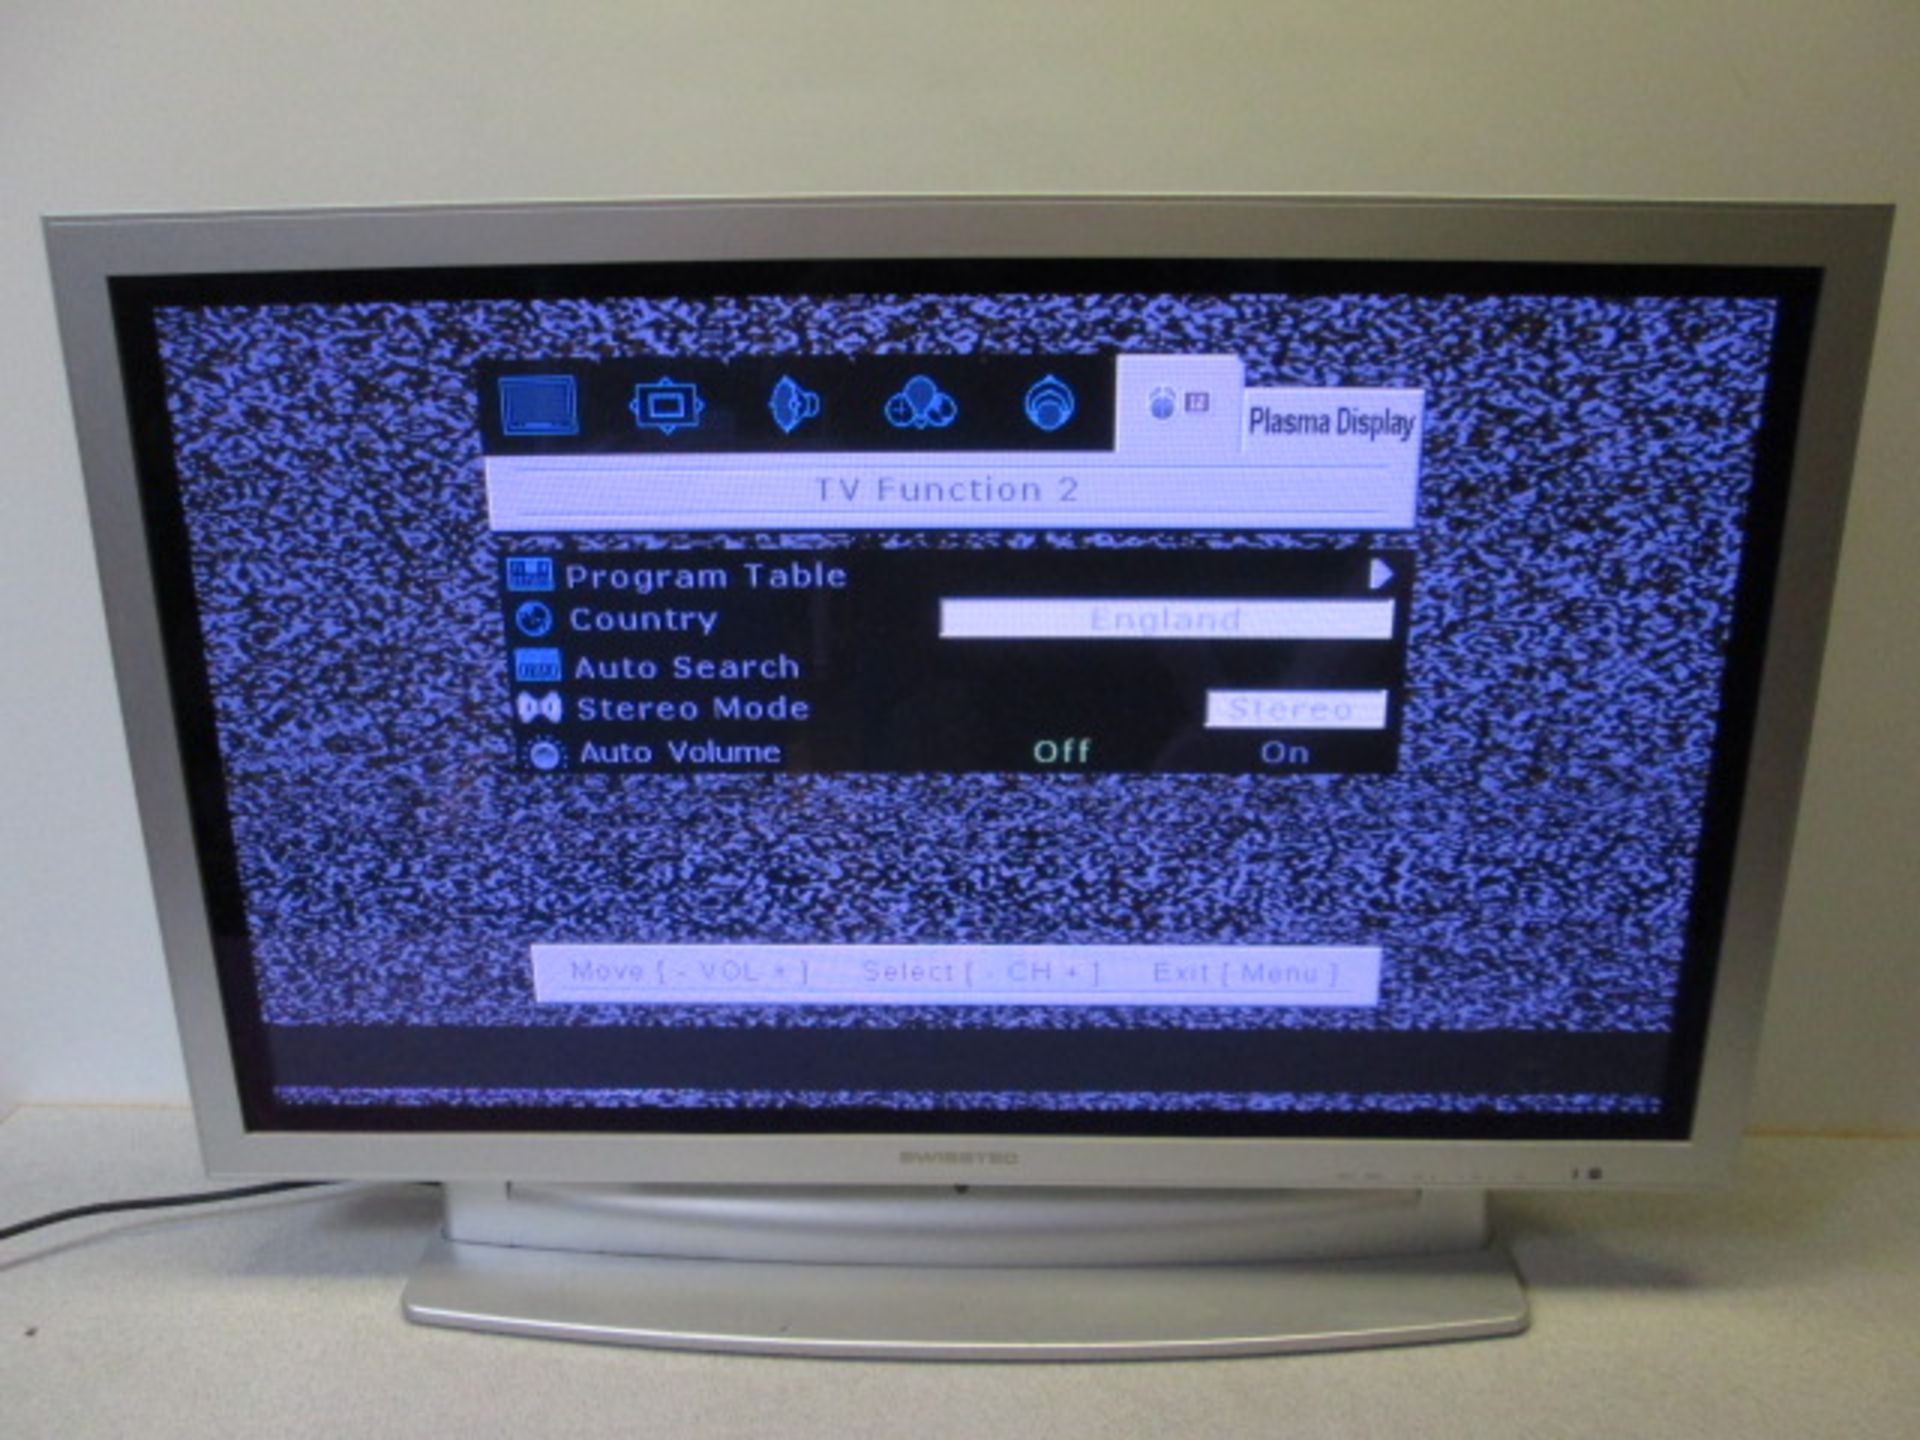 Swisstec 42" PDP TV Receiver, Model SKY-EN42/W1LG. Comes with Power Supply